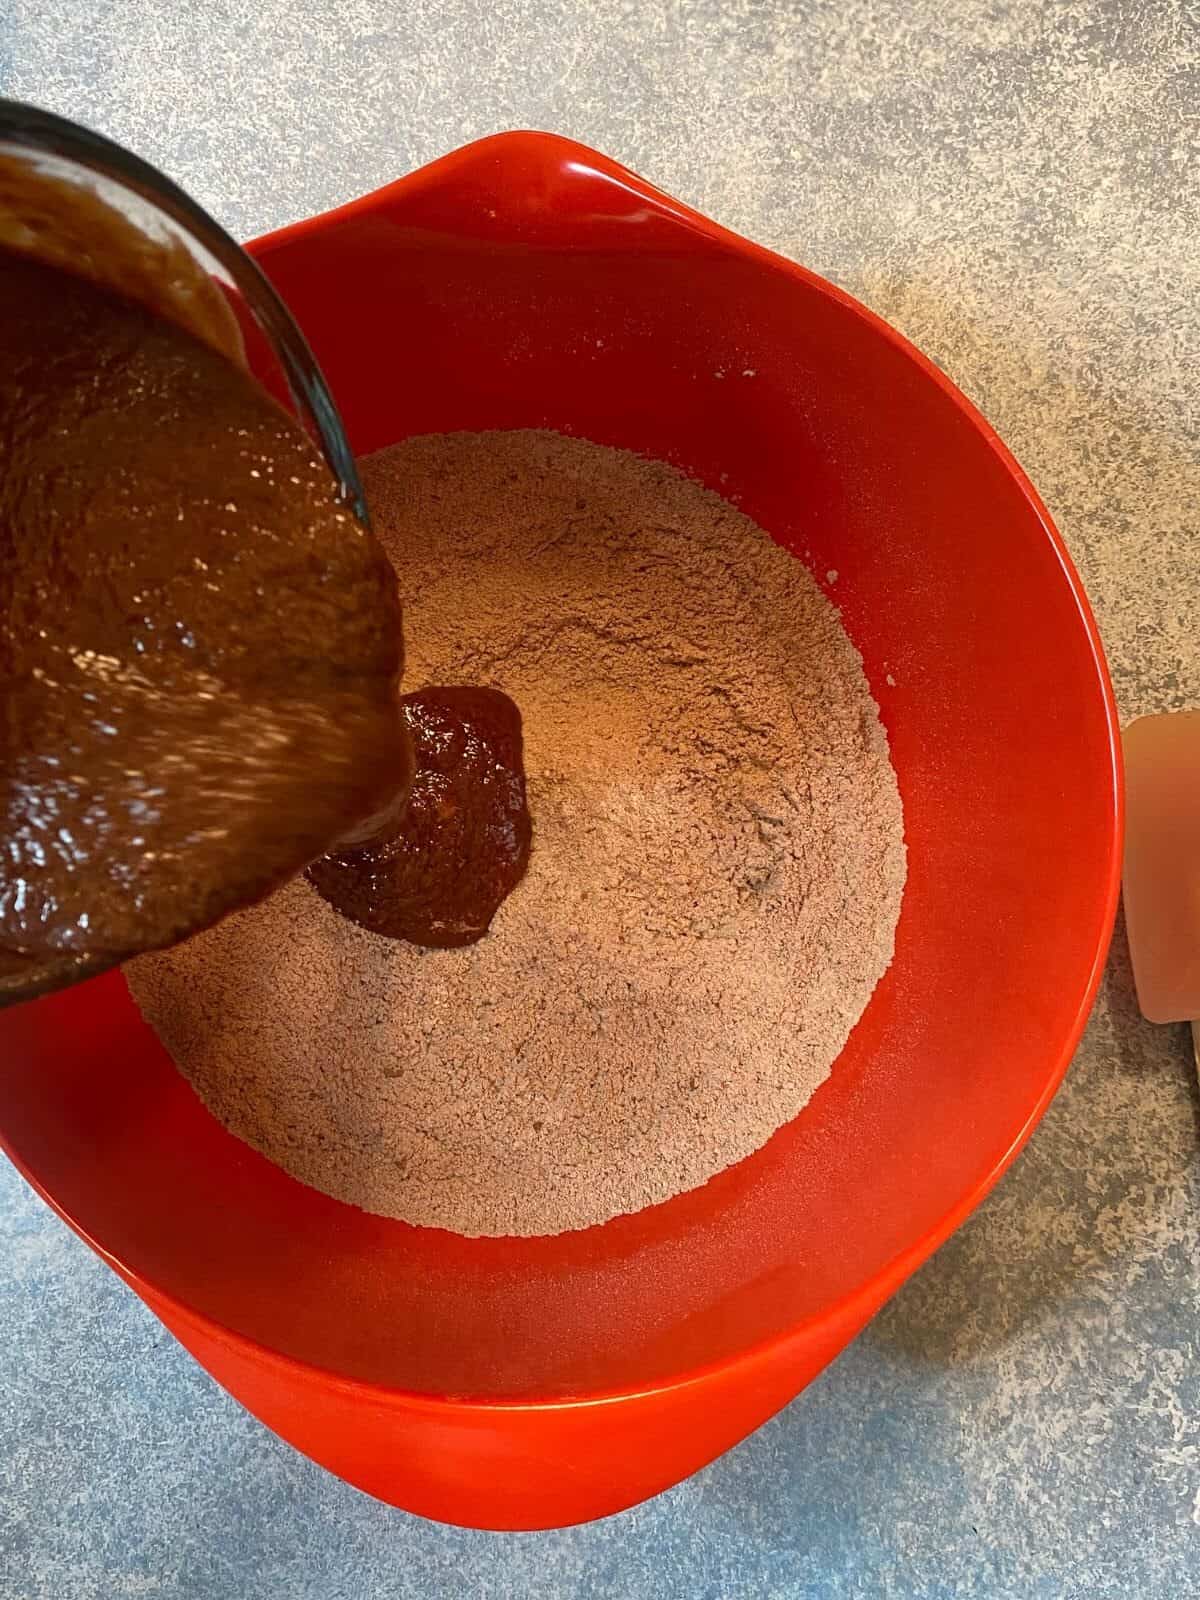 Pouring a chocolatey looking mixture into dry chocolatey ingredients in a red bowl